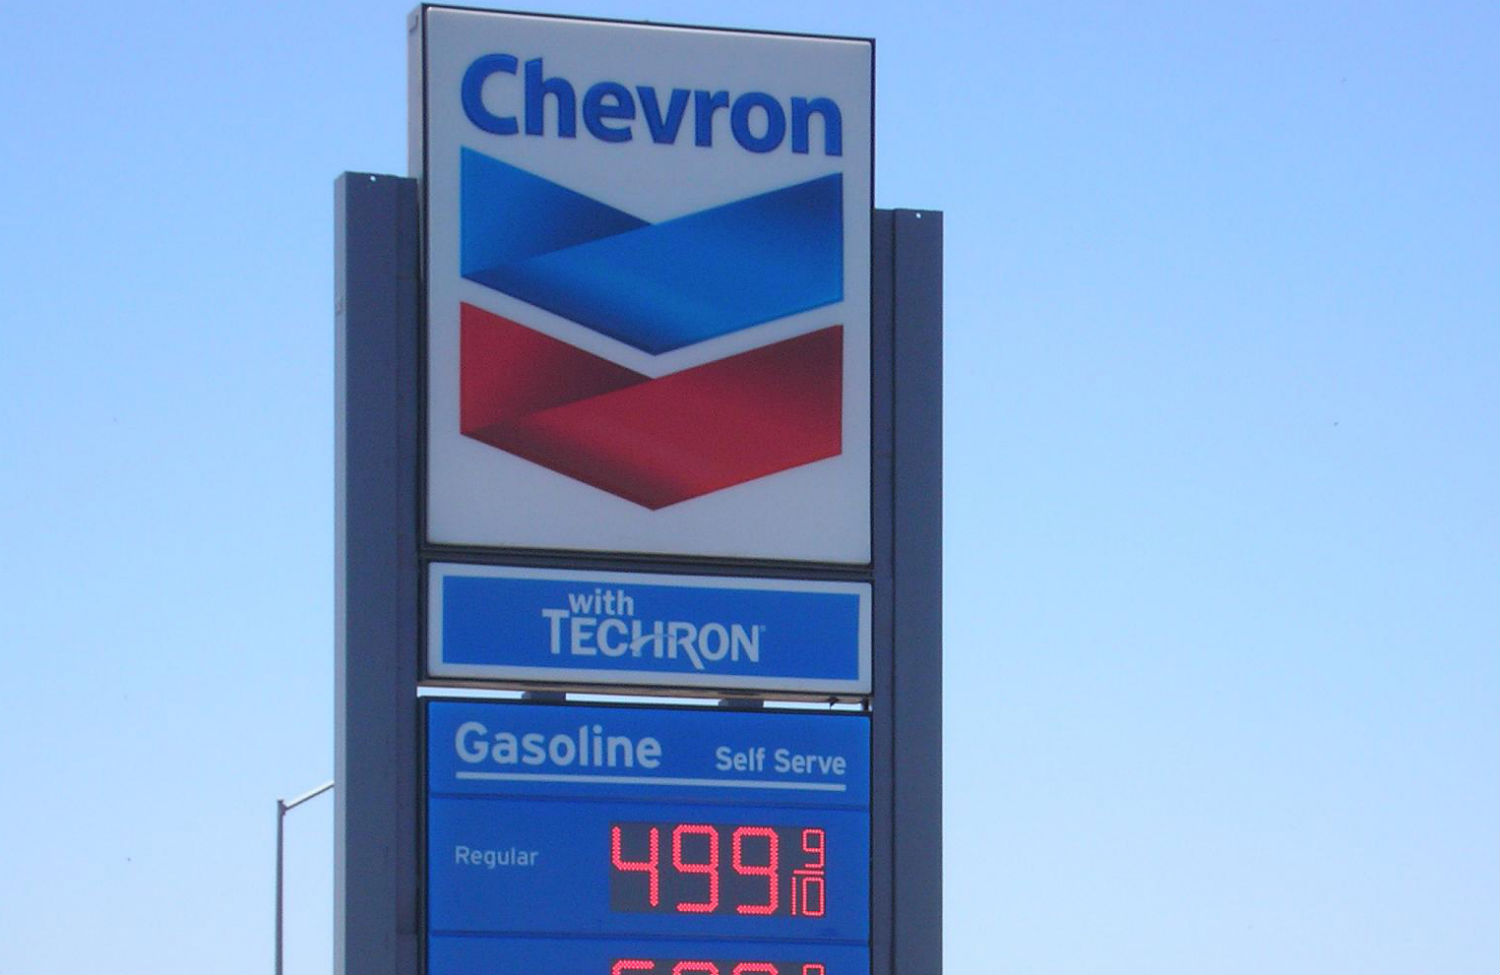 Chevron’s Lobbyist Now Runs the Congressional Science Committee